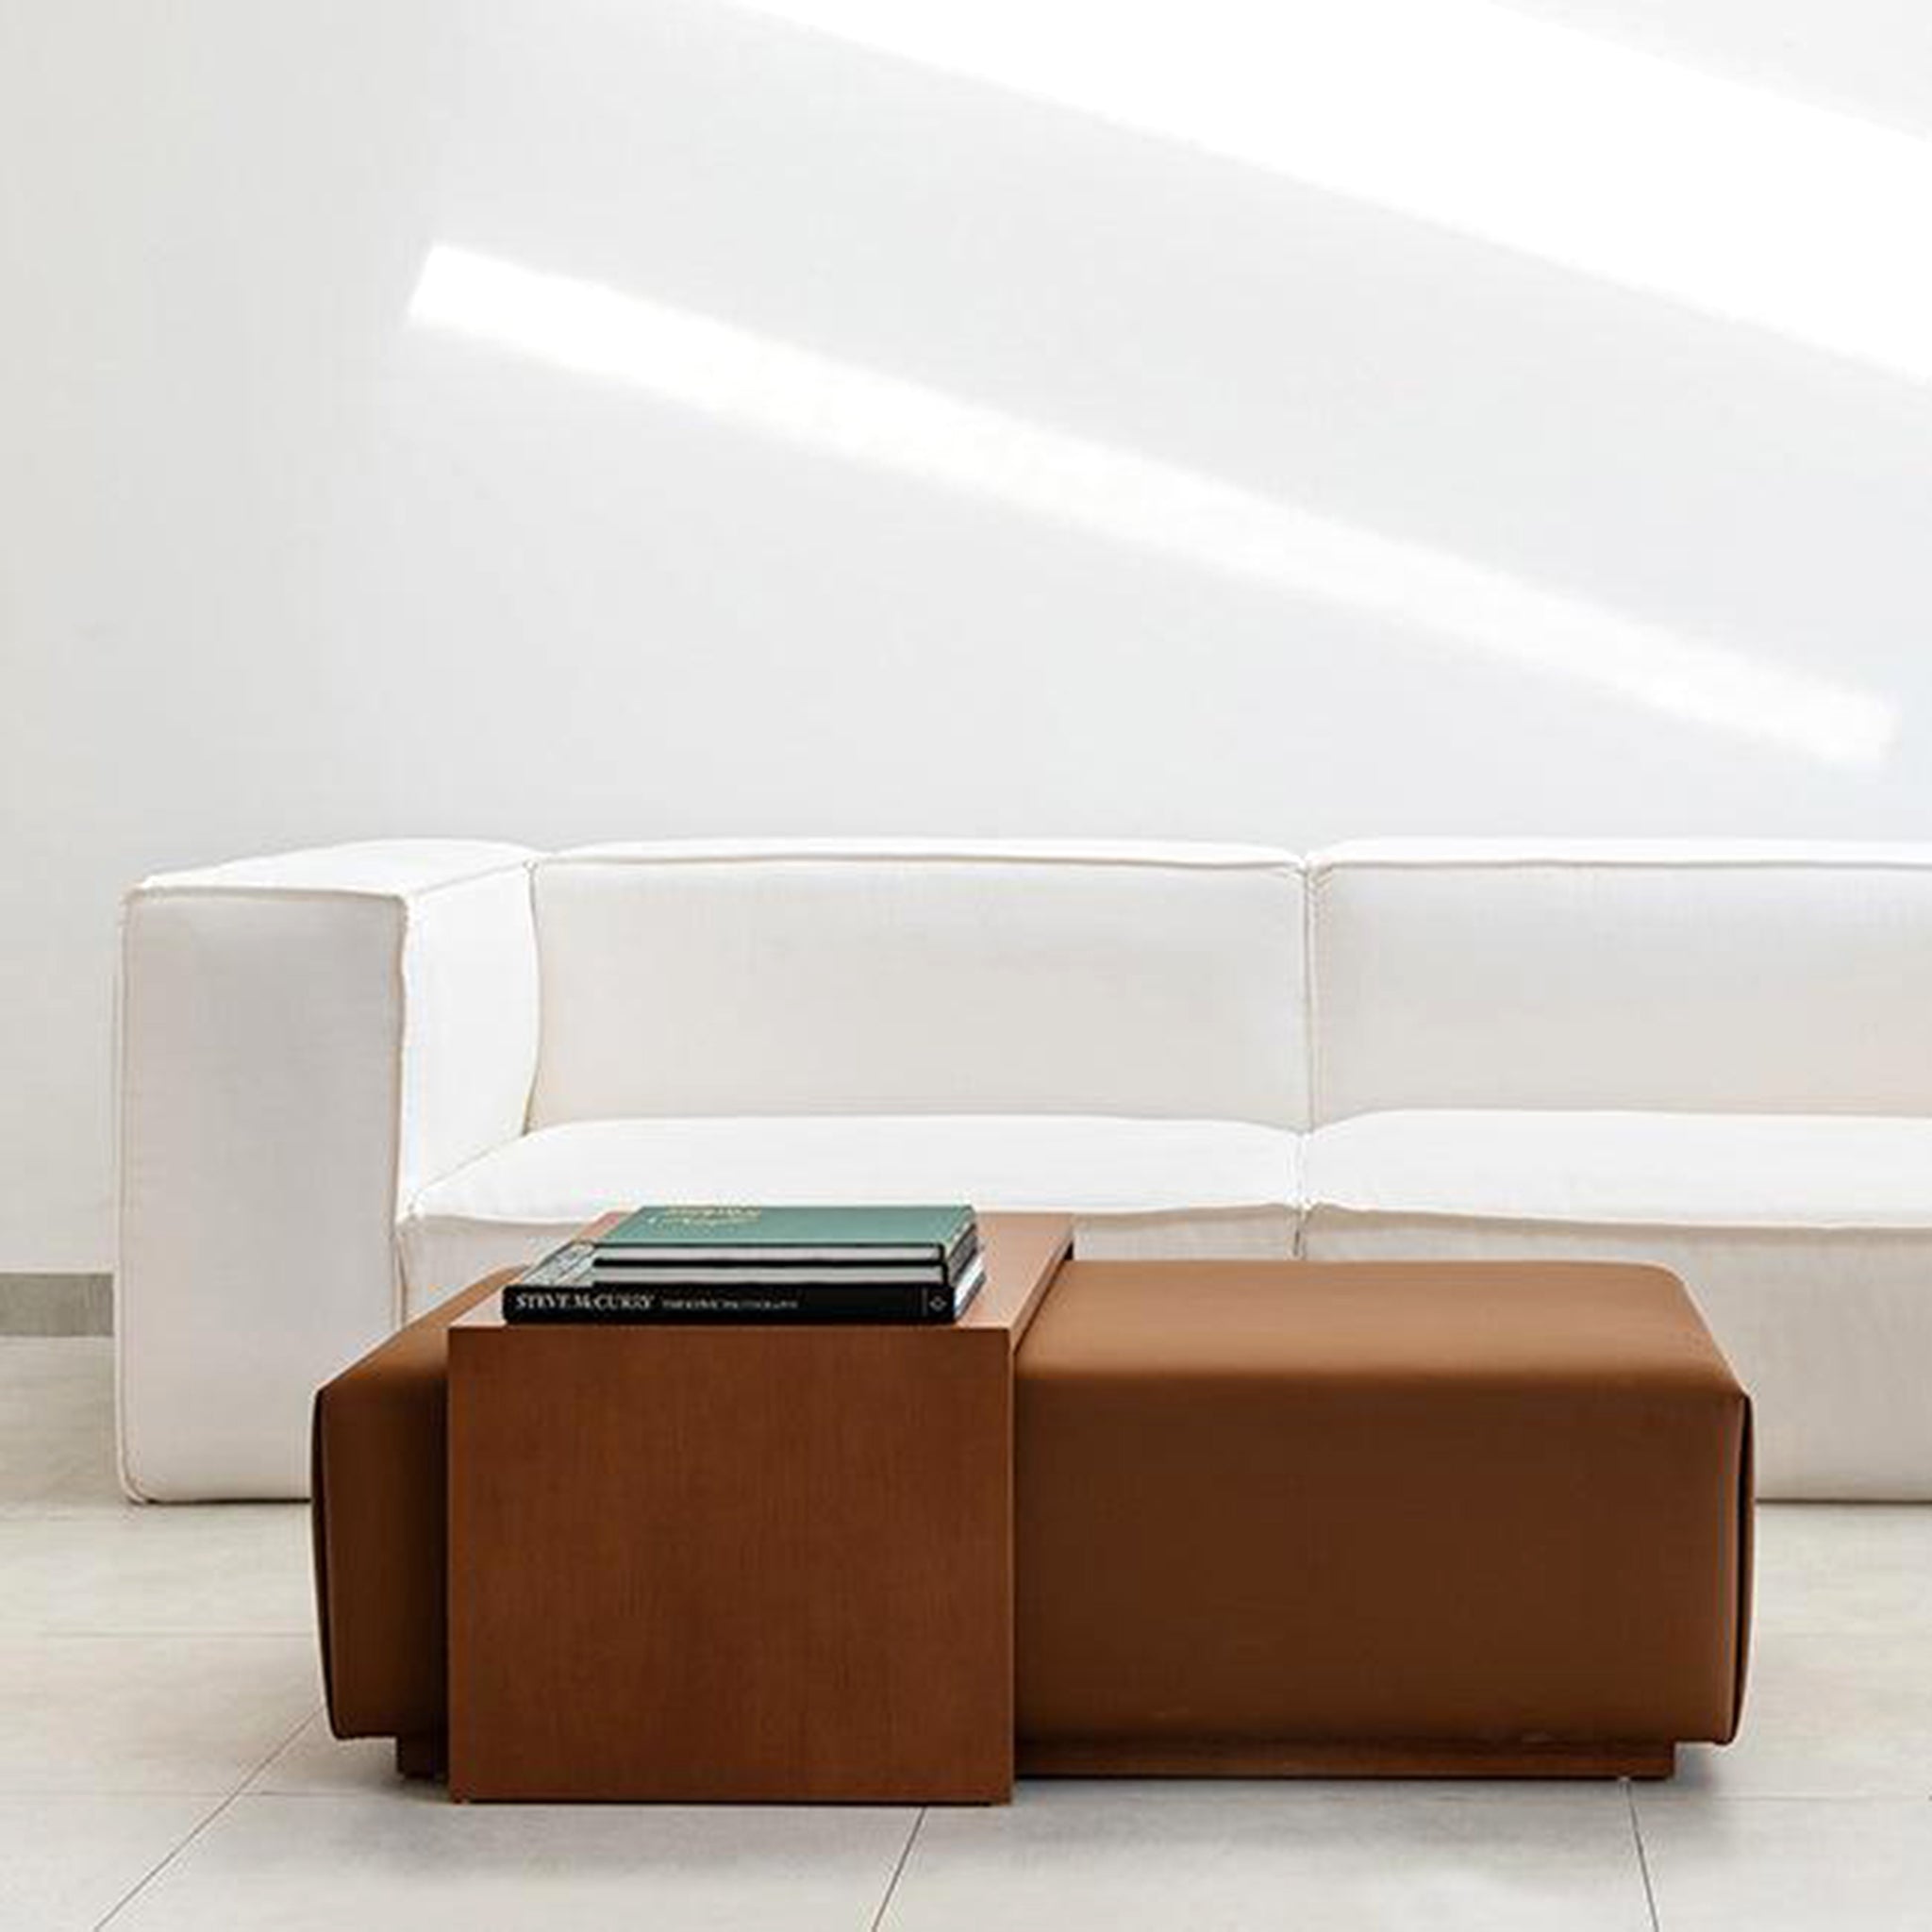 Modern living room with a white modular couch, accompanied by a brown leather ottoman and a wooden side table holding books, bathed in natural light.